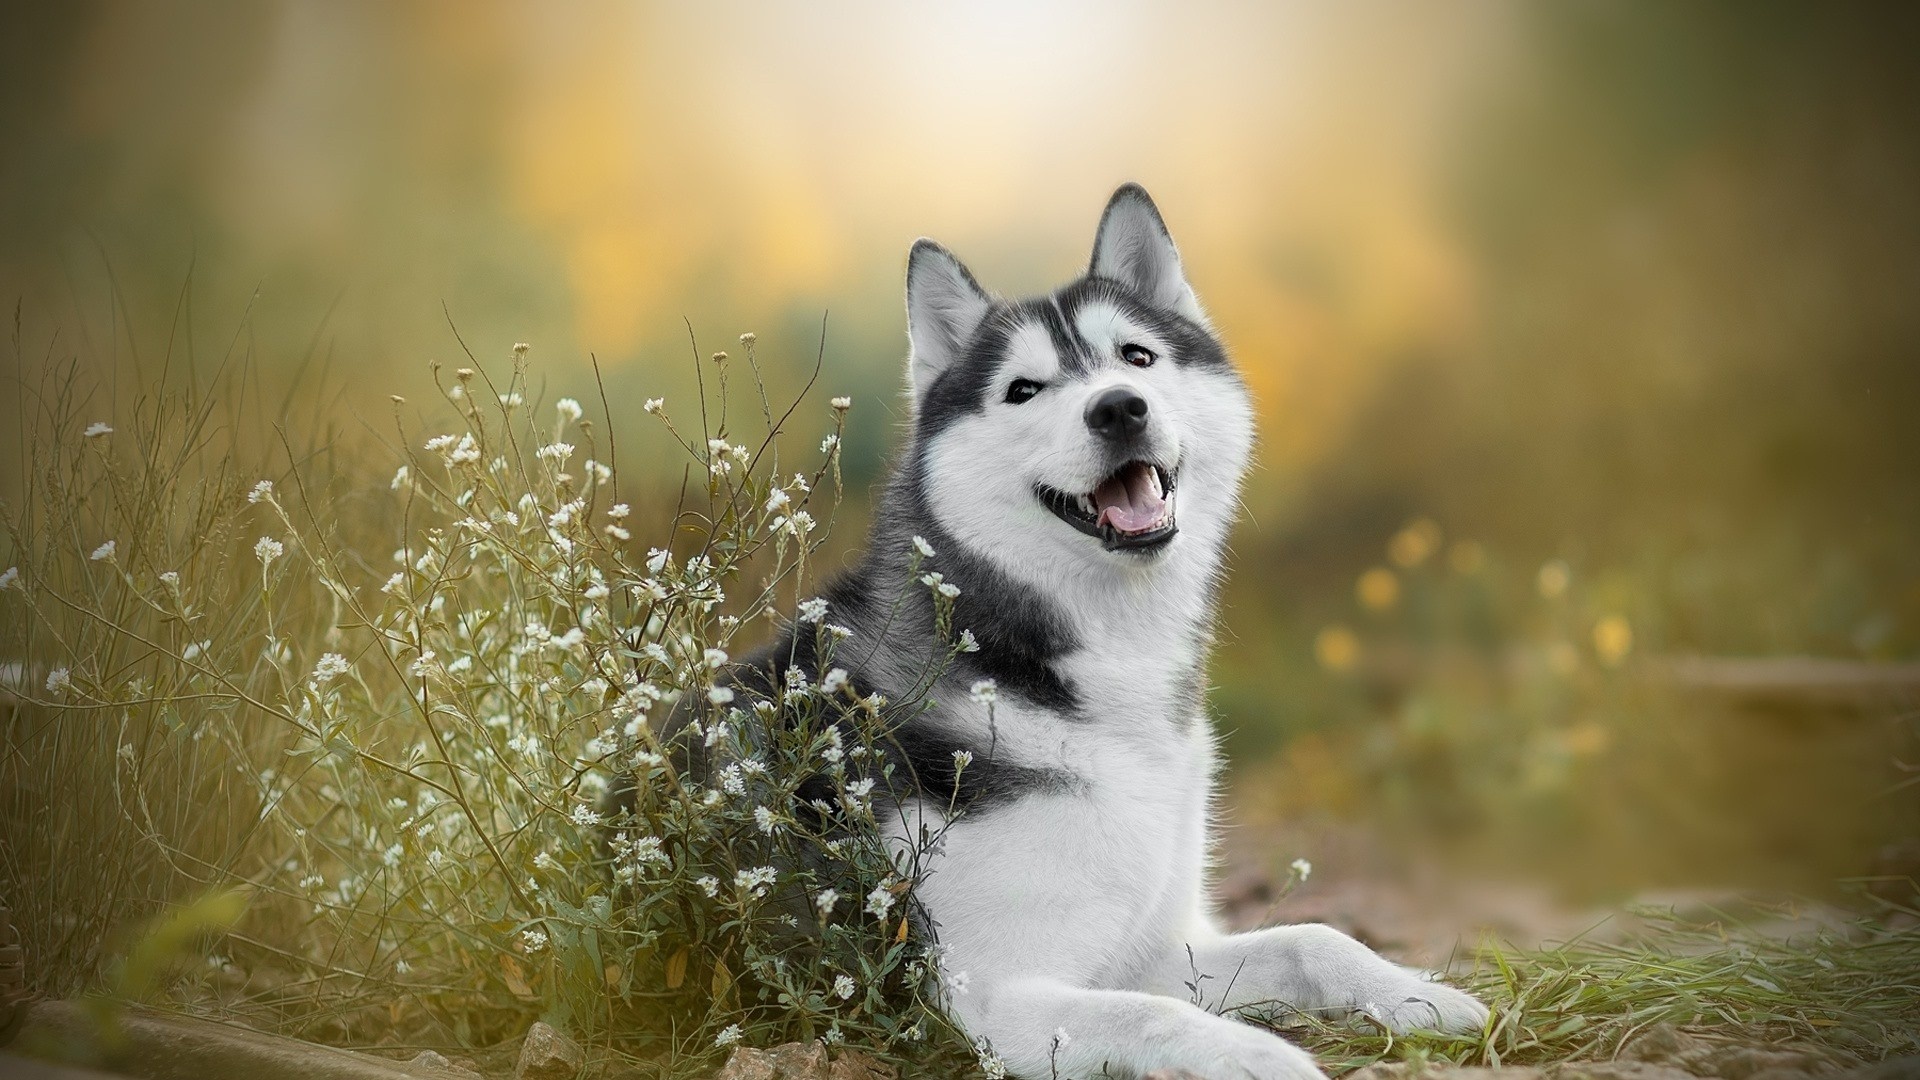 Husky wallpapers, Captivating images, High-quality, 1920x1080 Full HD Desktop